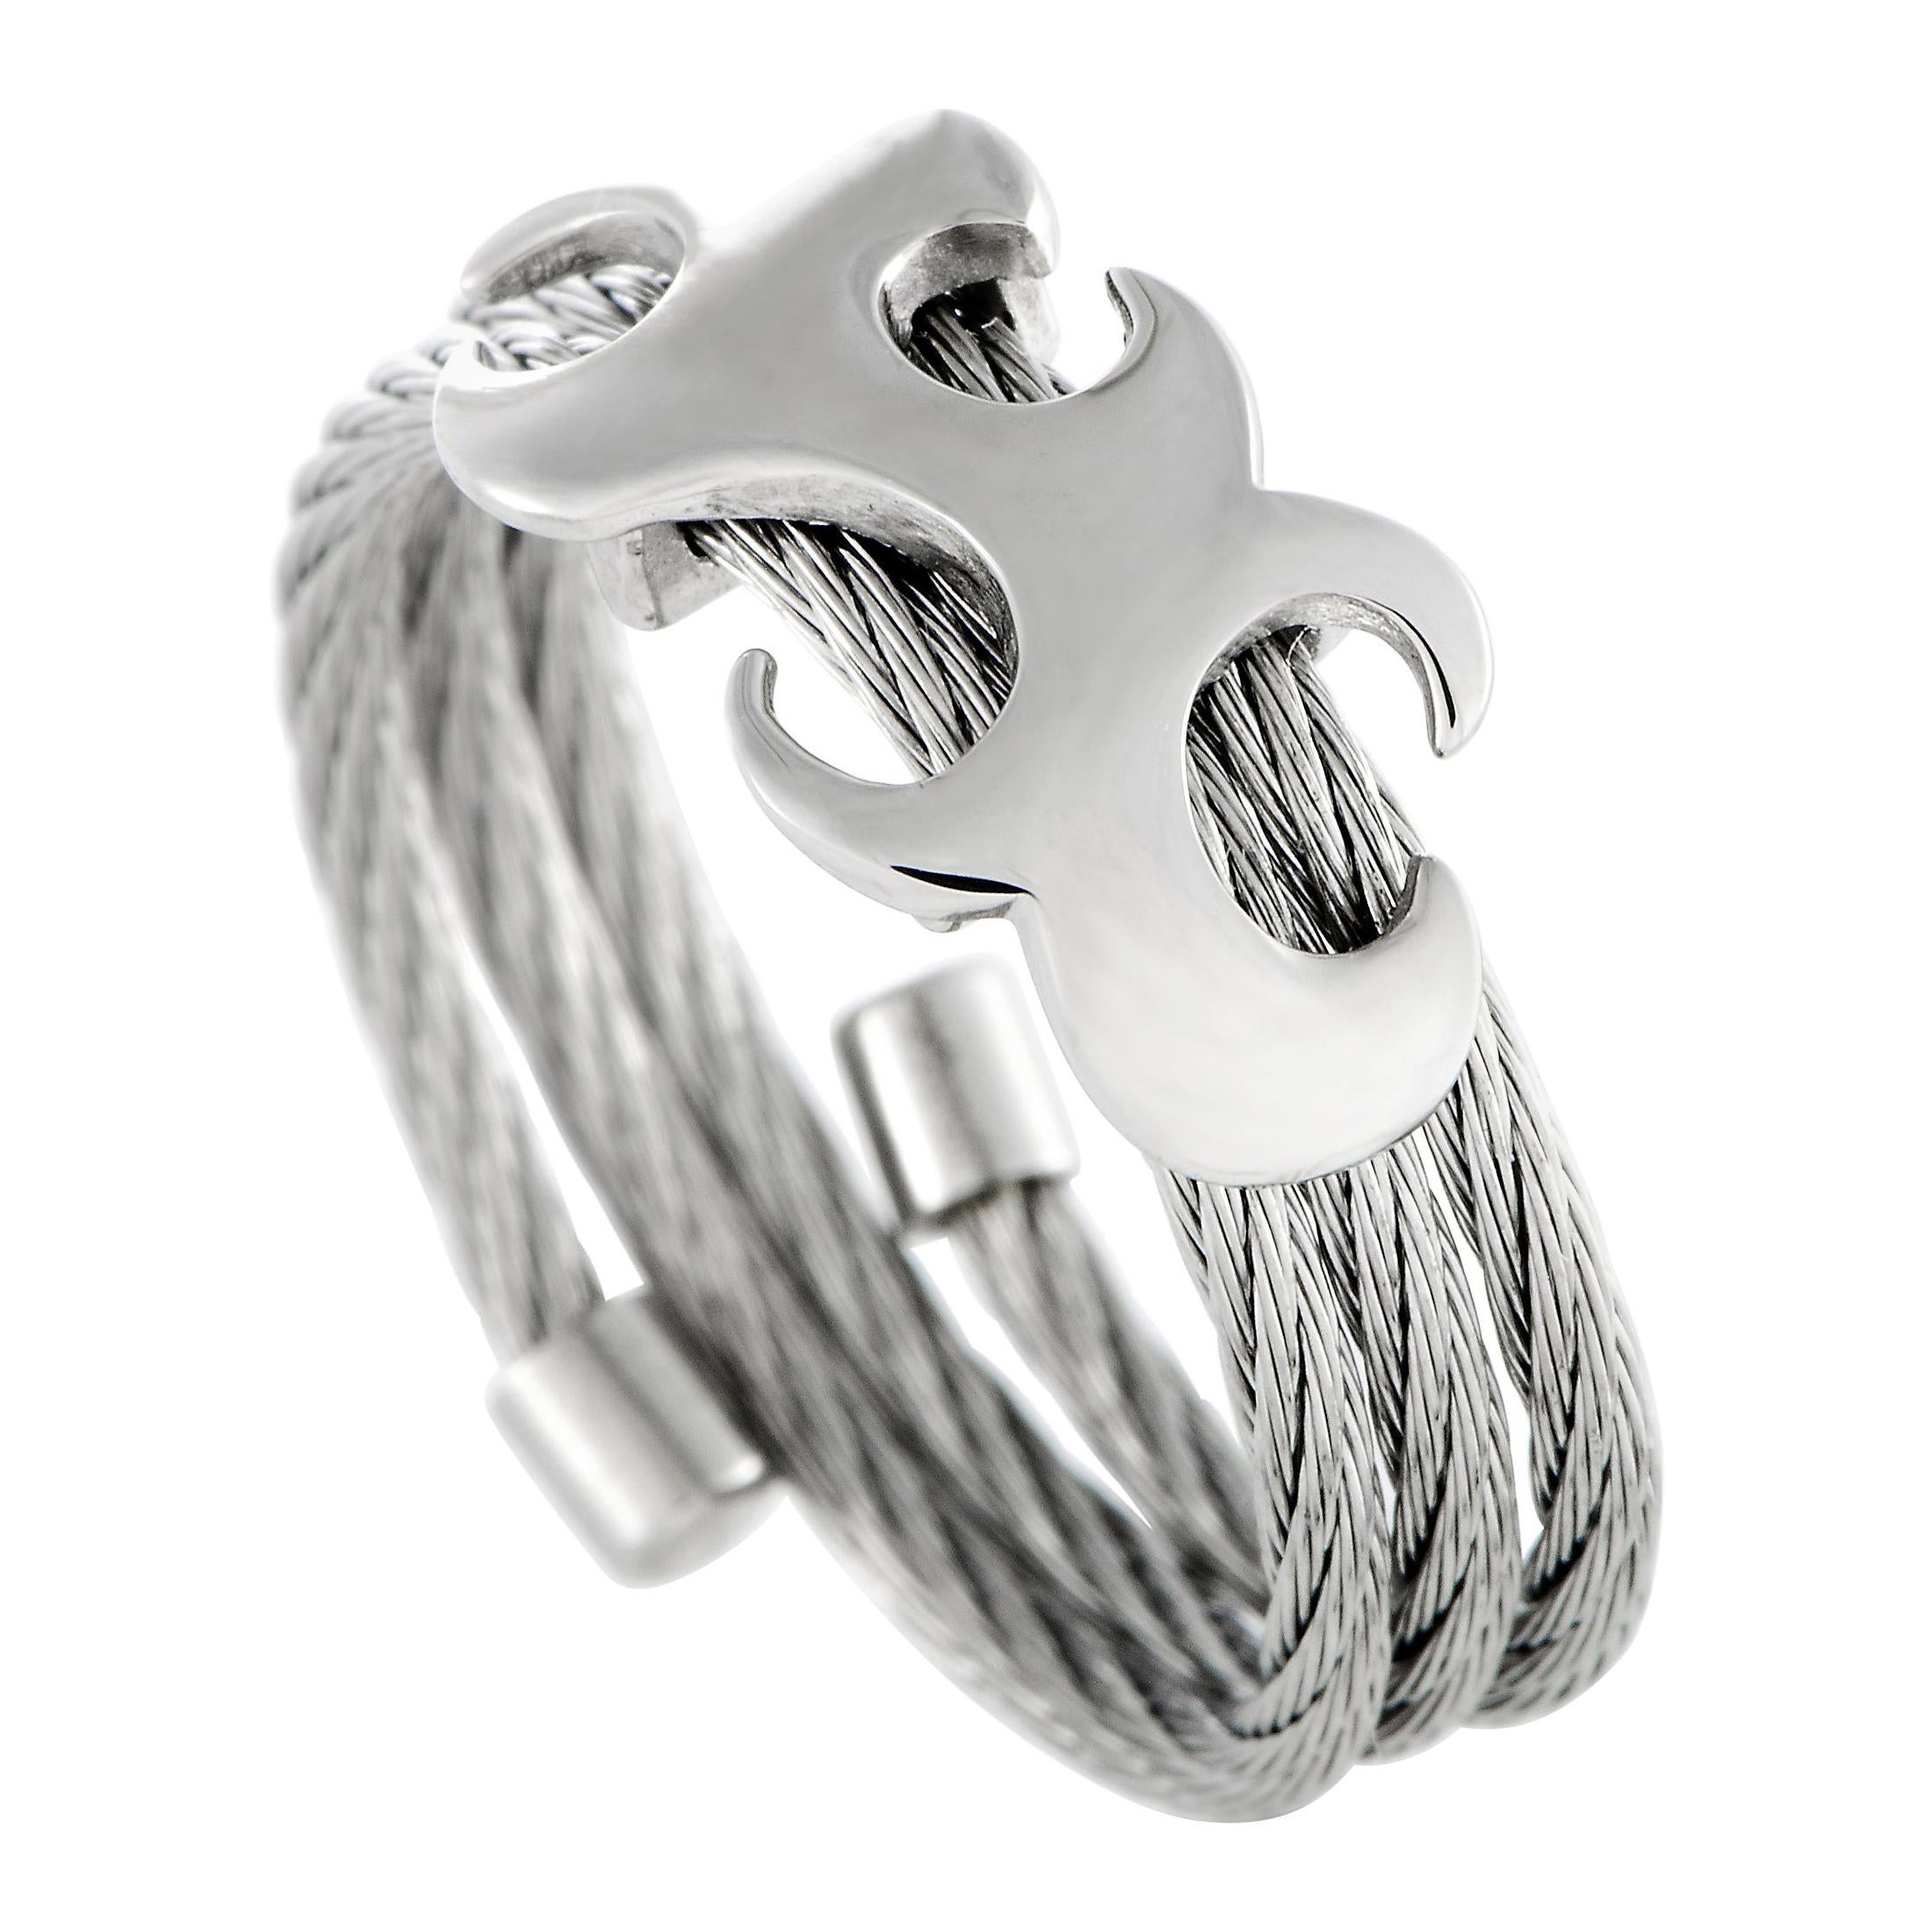 Charriol Tattoo Stainless Steel Spiral Cable Band Ring